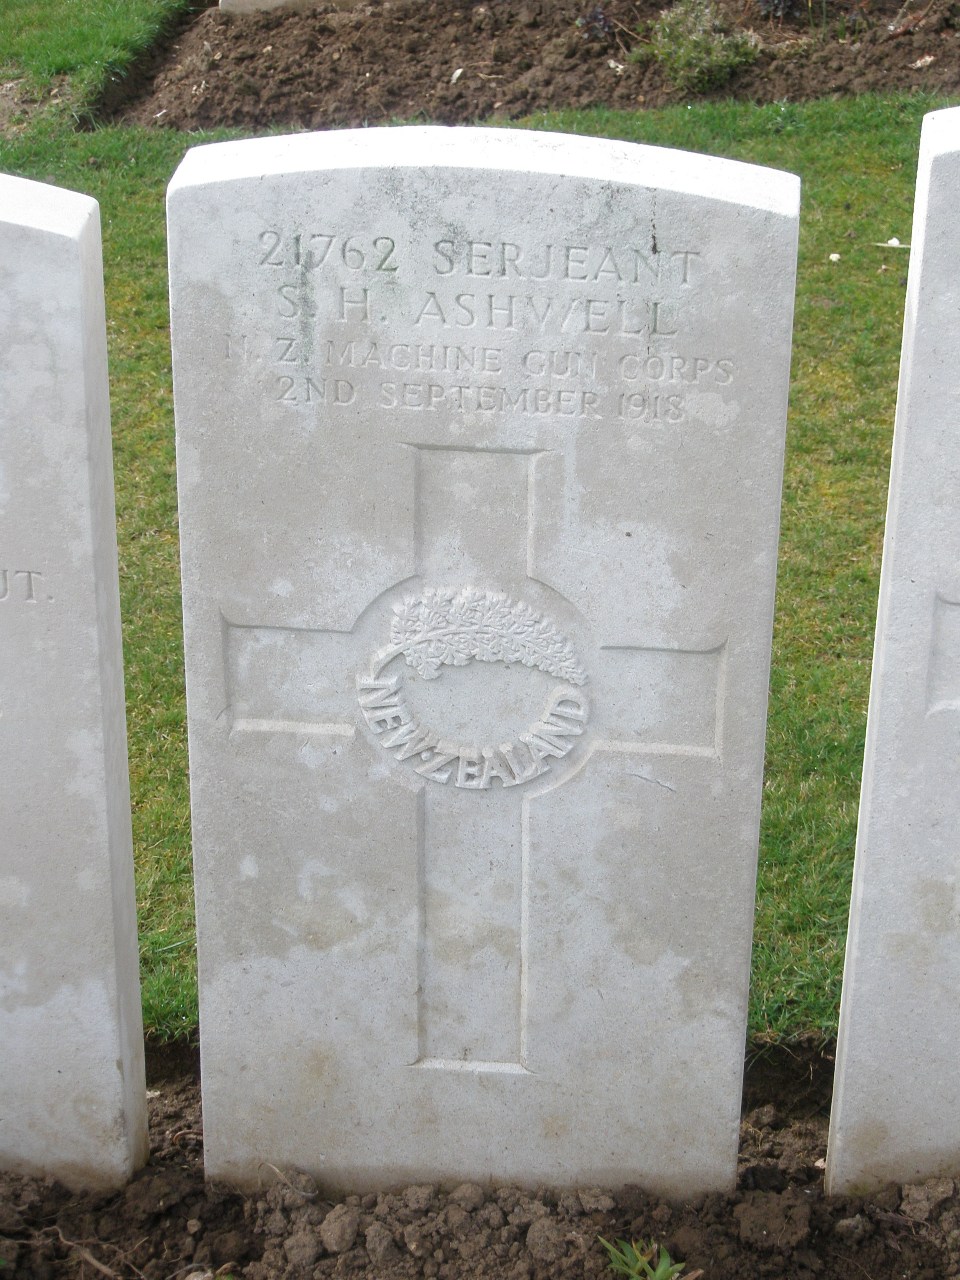 Sidney Ashwell's grave, Begneux British Cemetery